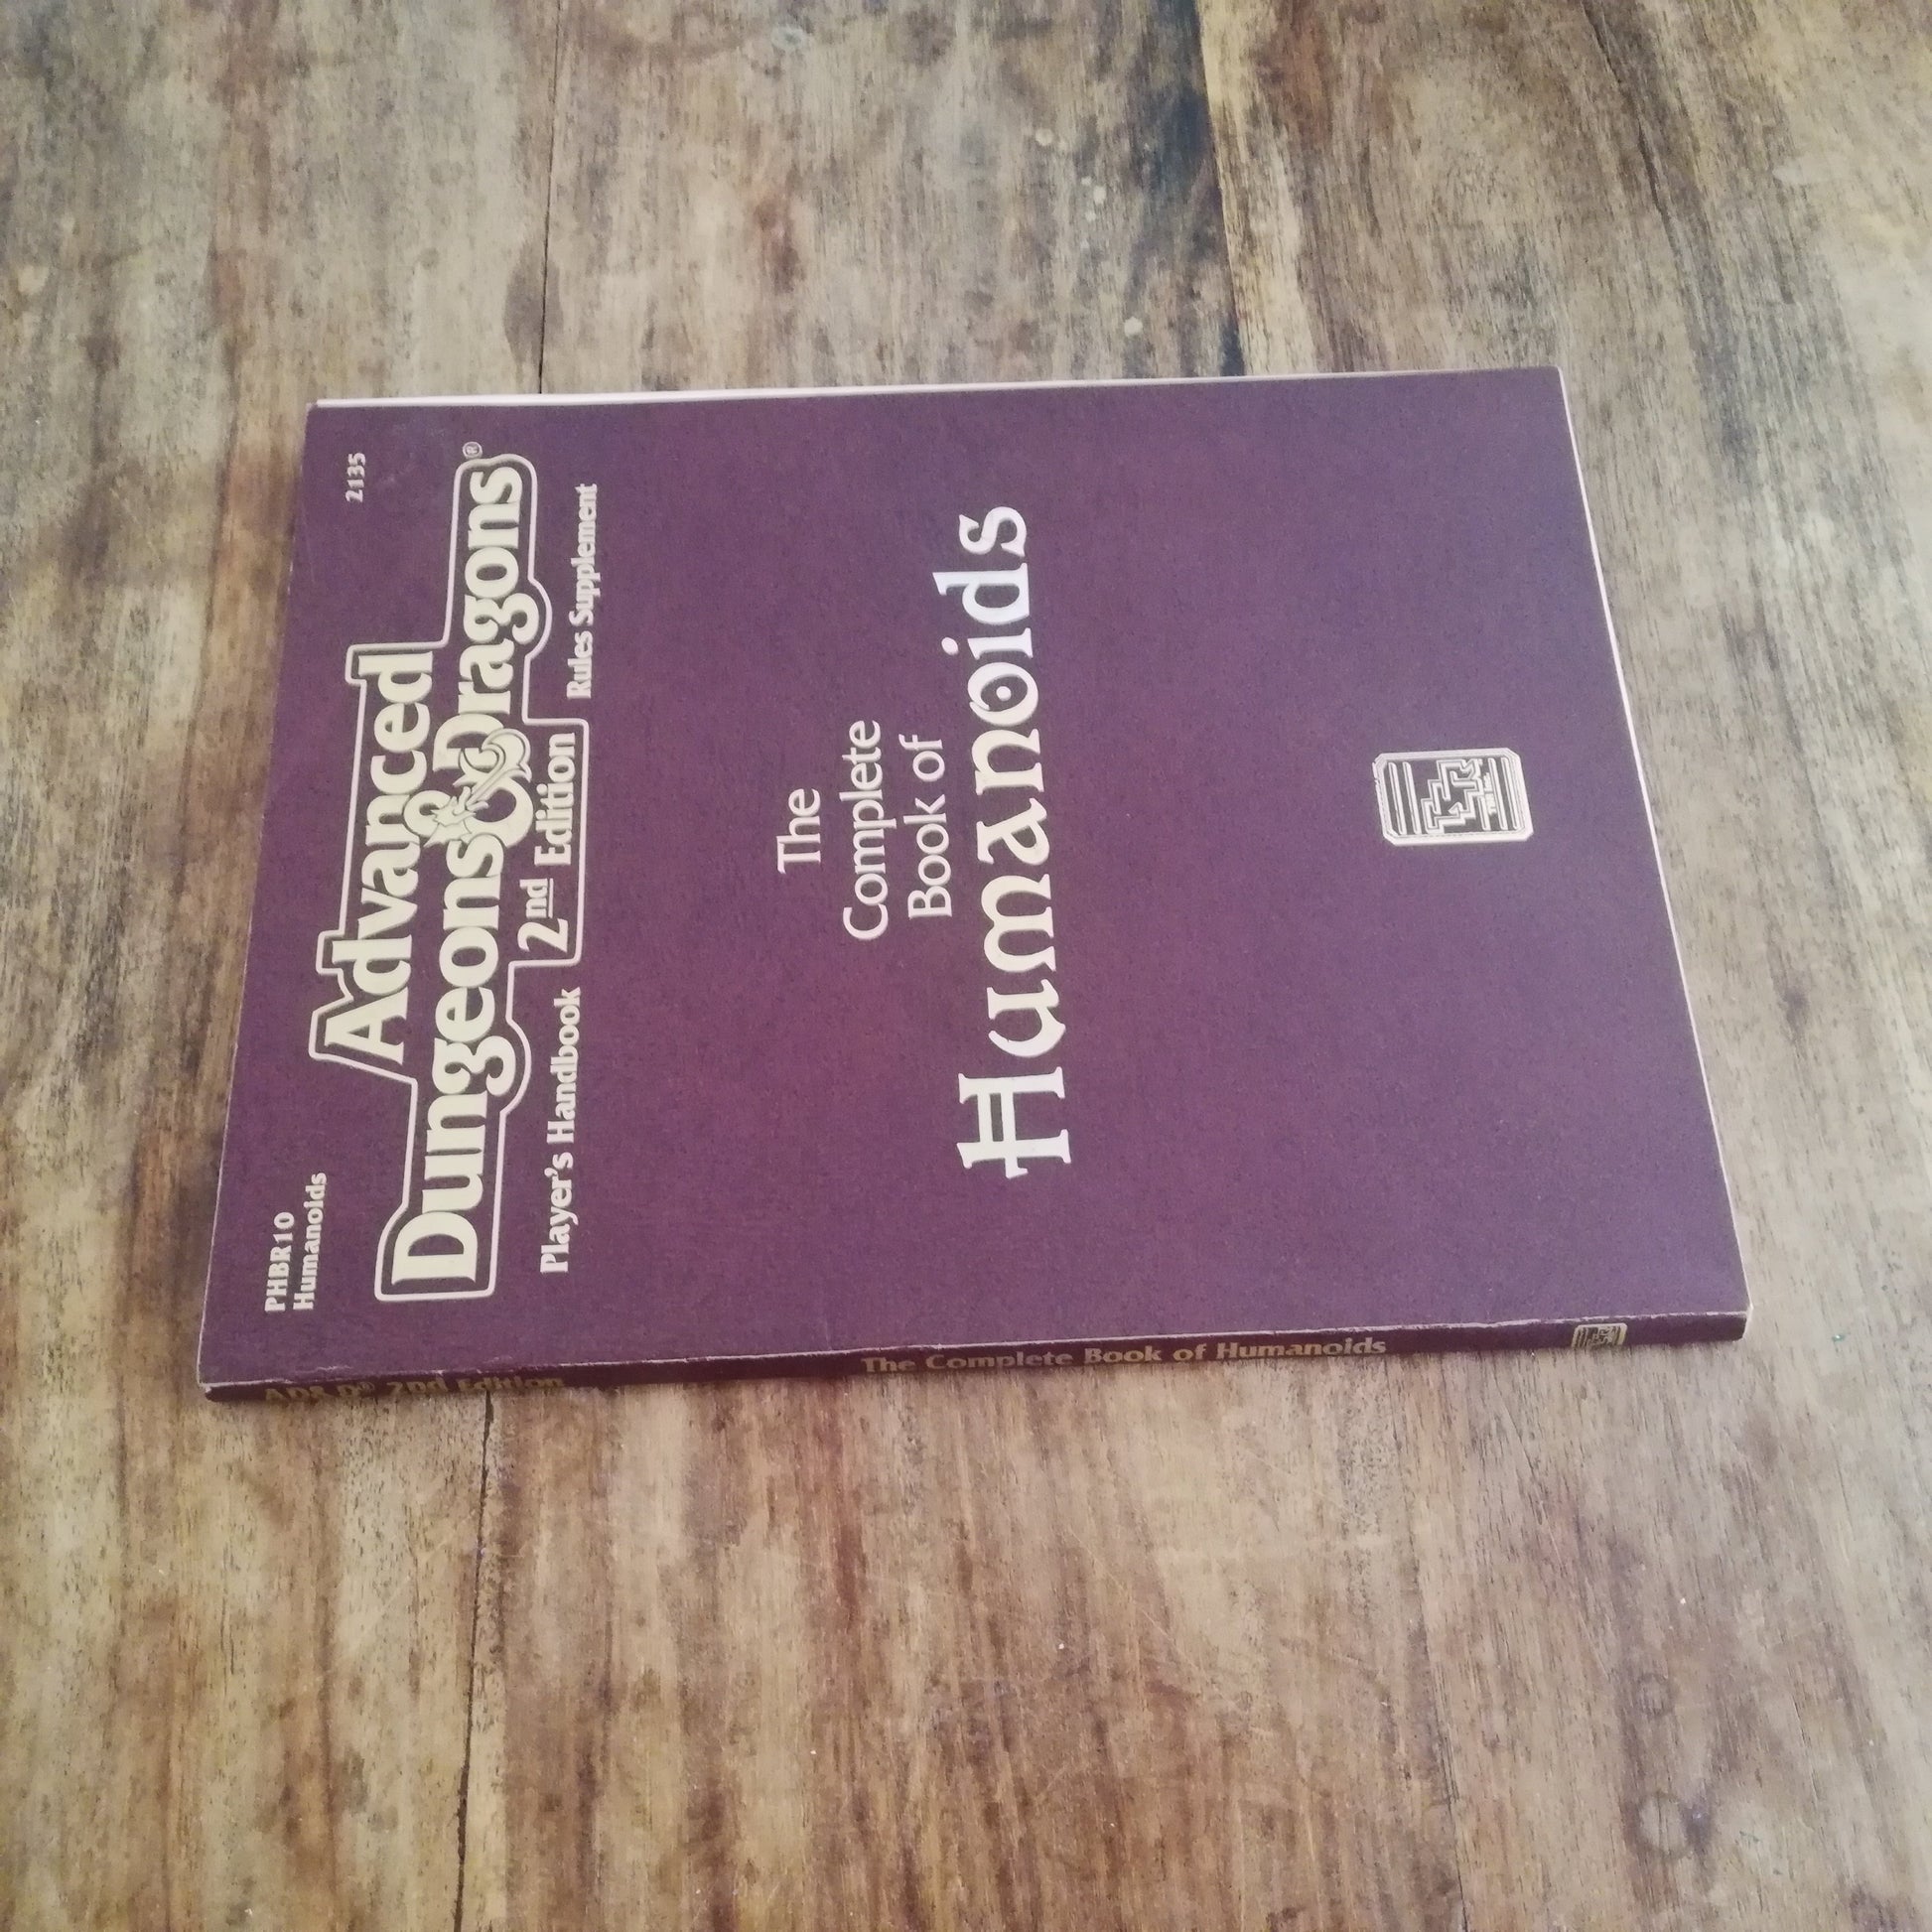 AD&D The Complete Book of Humanoids TSR 2nd Ed - AllRoleplaying.com